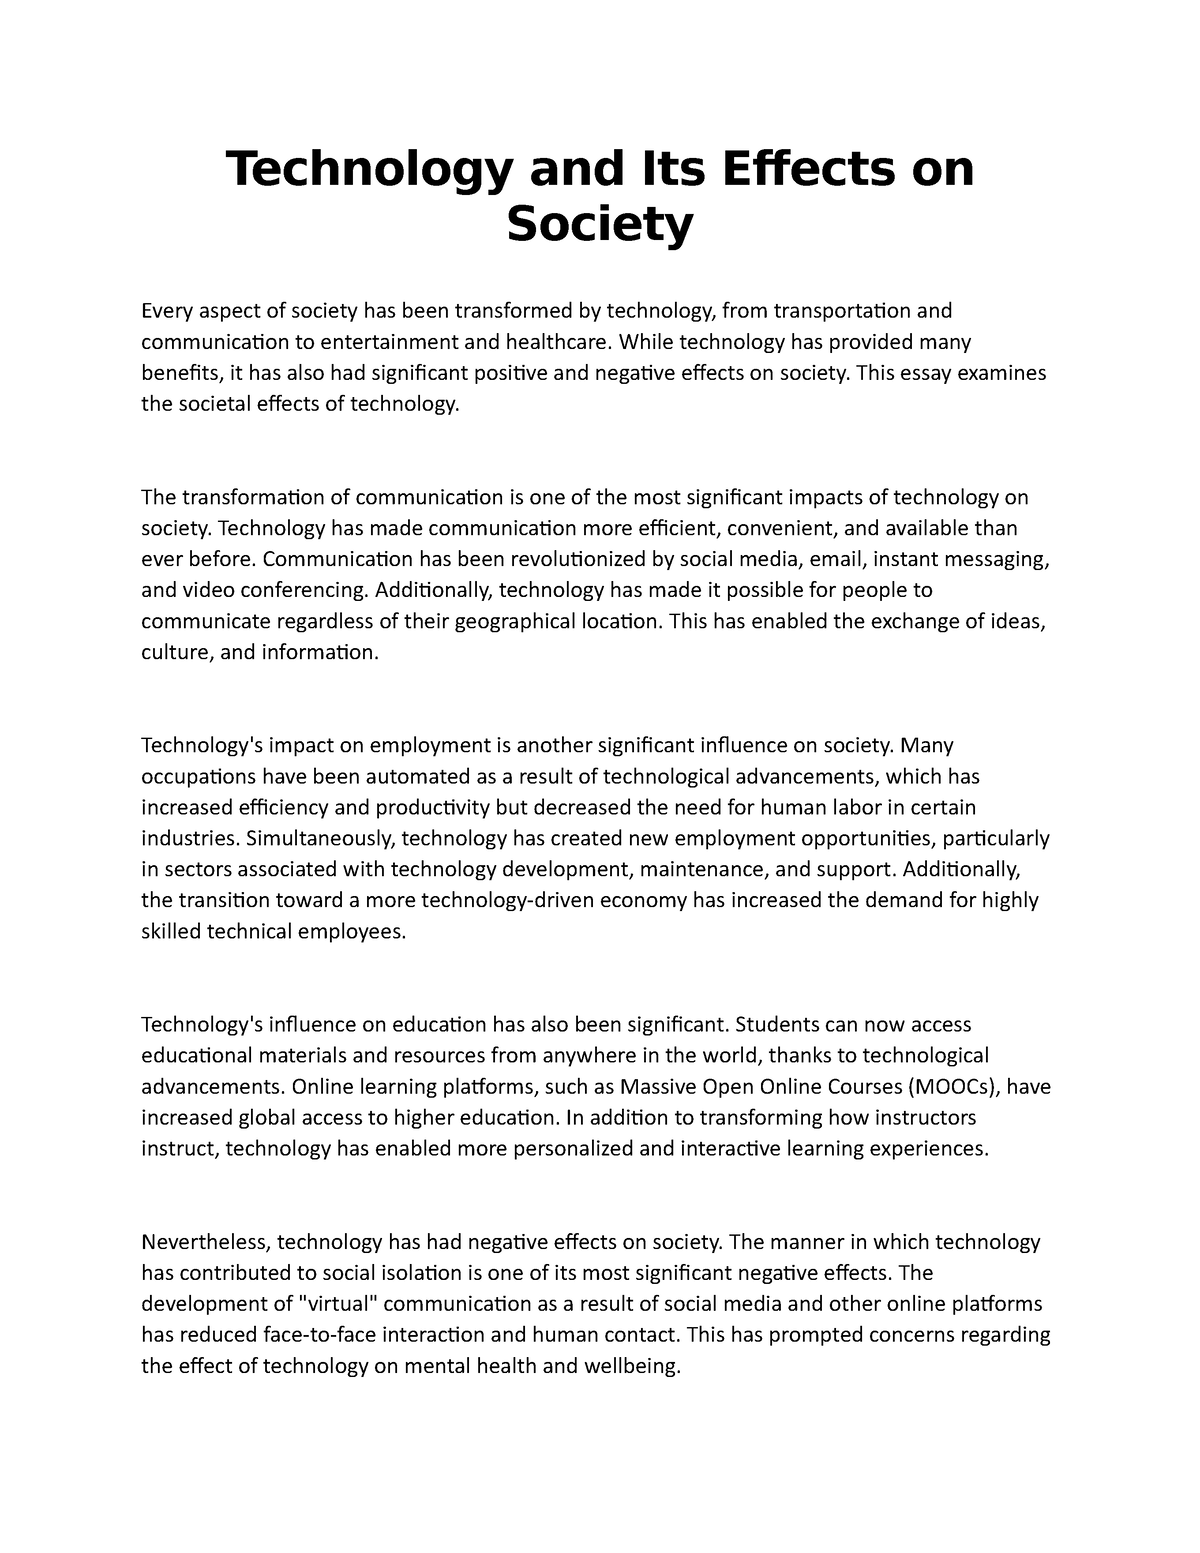 technology effects on society essay